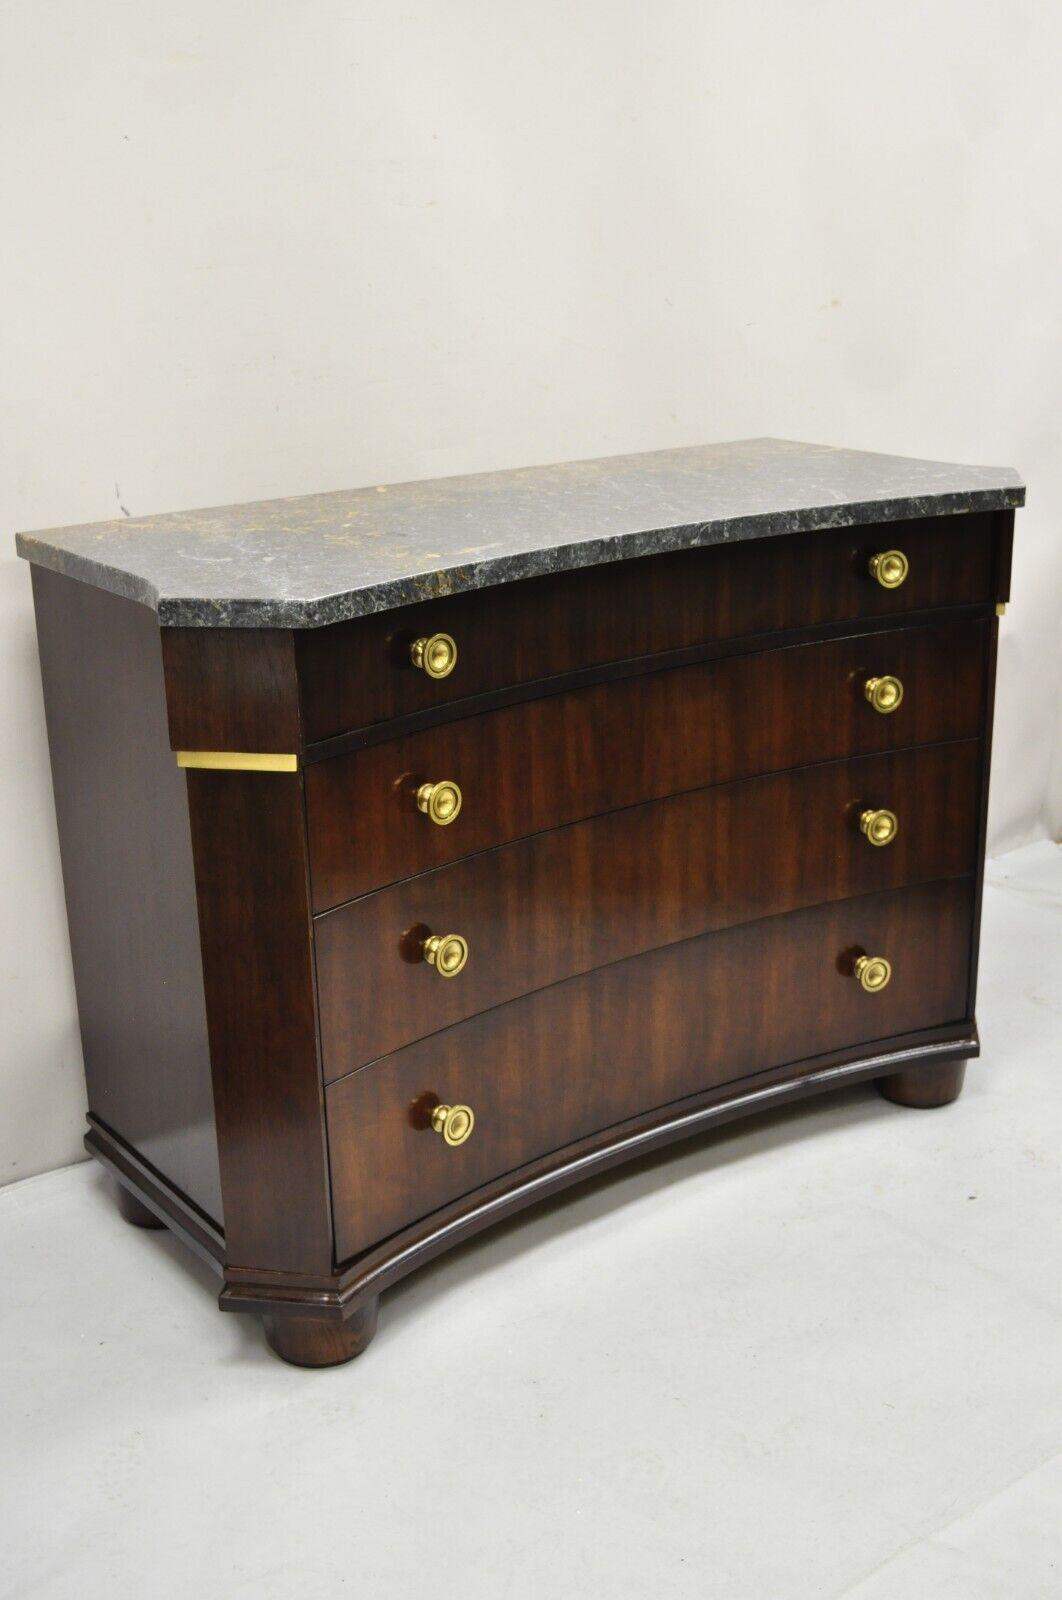 Henredon Empire Neoclassical Marble Top Mahogany 4 Drawer Dresser Chest Commode.  Item features 4 drawers, solid brass hardware, beautiful woodgrain, serpentine marble top, original label, quality American craftsmanship. Circa Late 20th - 21st